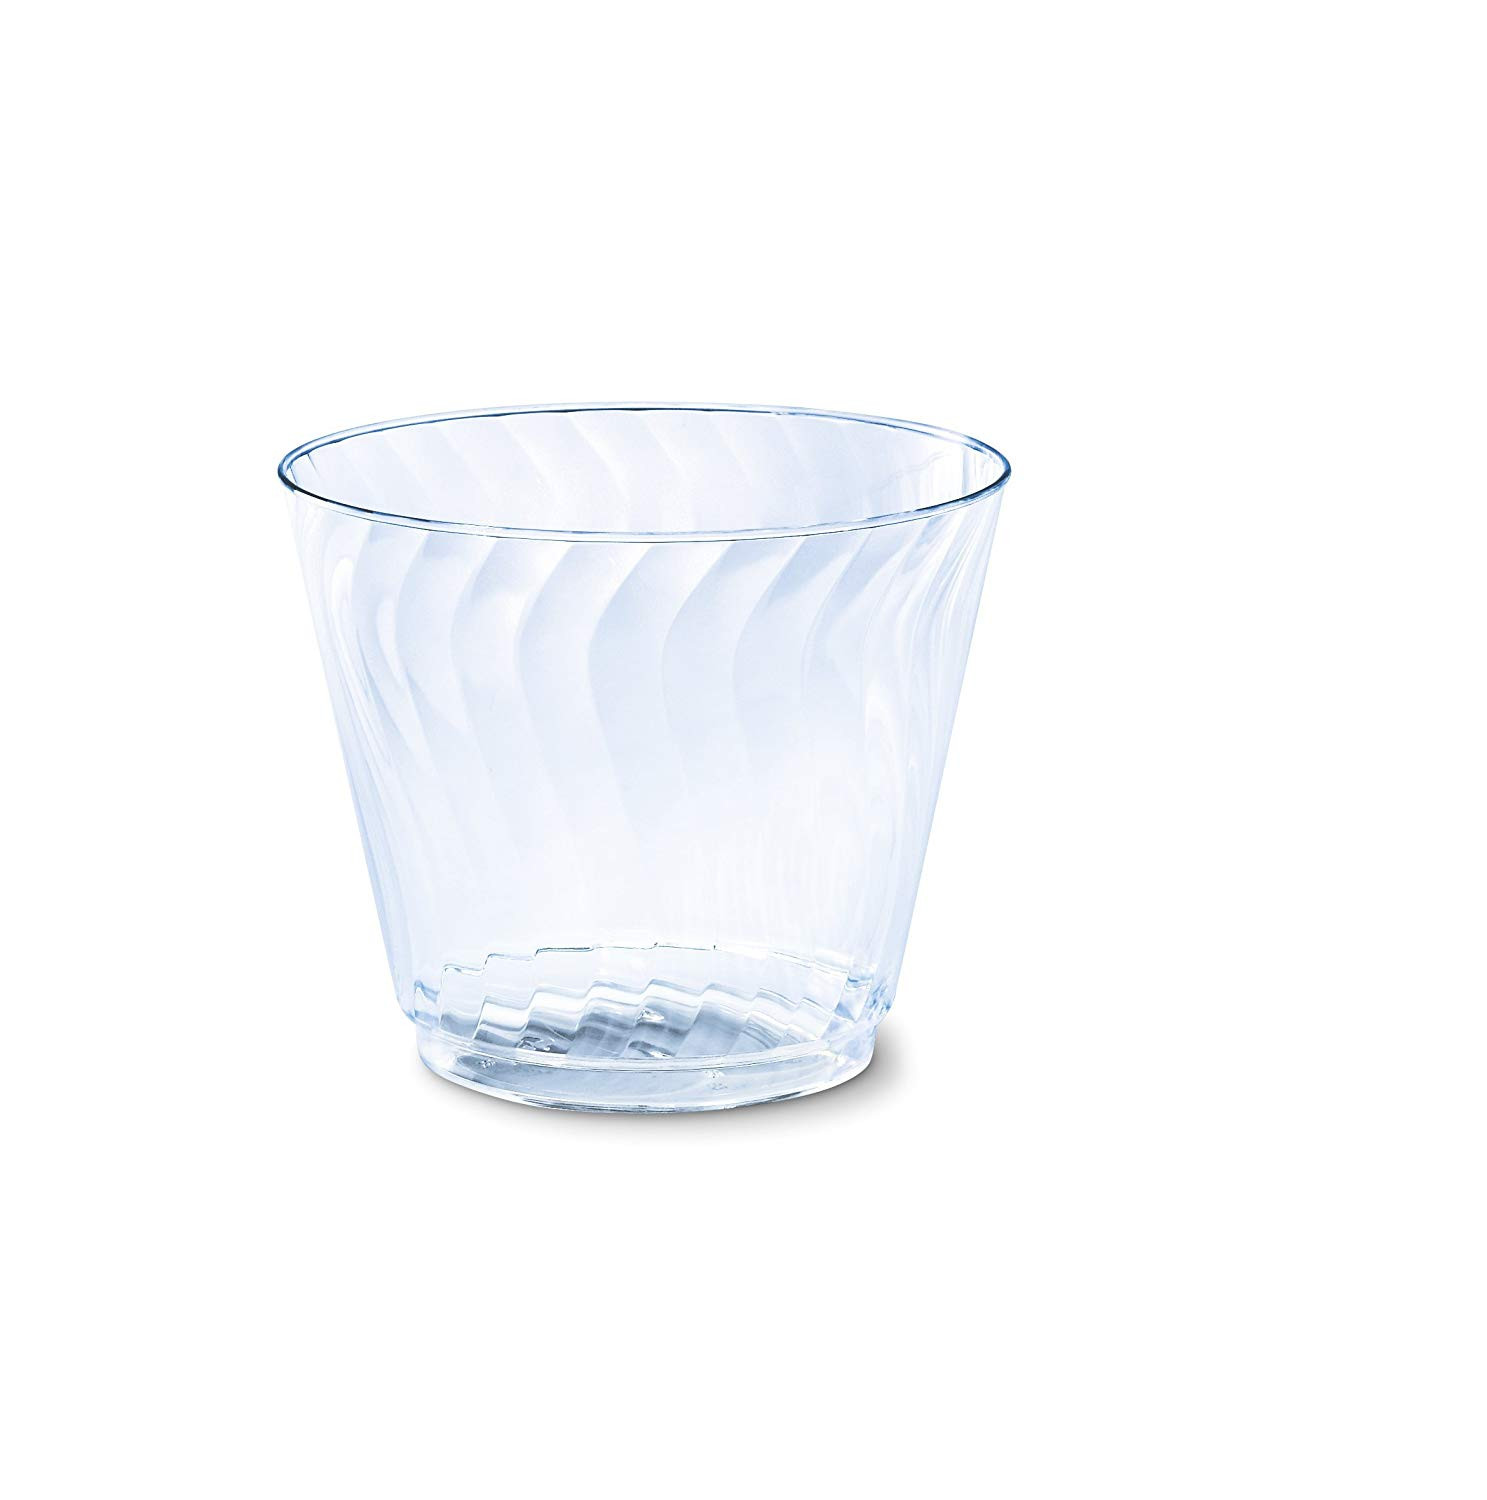 24 attractive Mercer Large Recycled Glass Vase 2022 free download mercer large recycled glass vase of amazon com chinet cut crystal tumblers 9 ounce 100 count health regarding amazon com chinet cut crystal tumblers 9 ounce 100 count health personal care